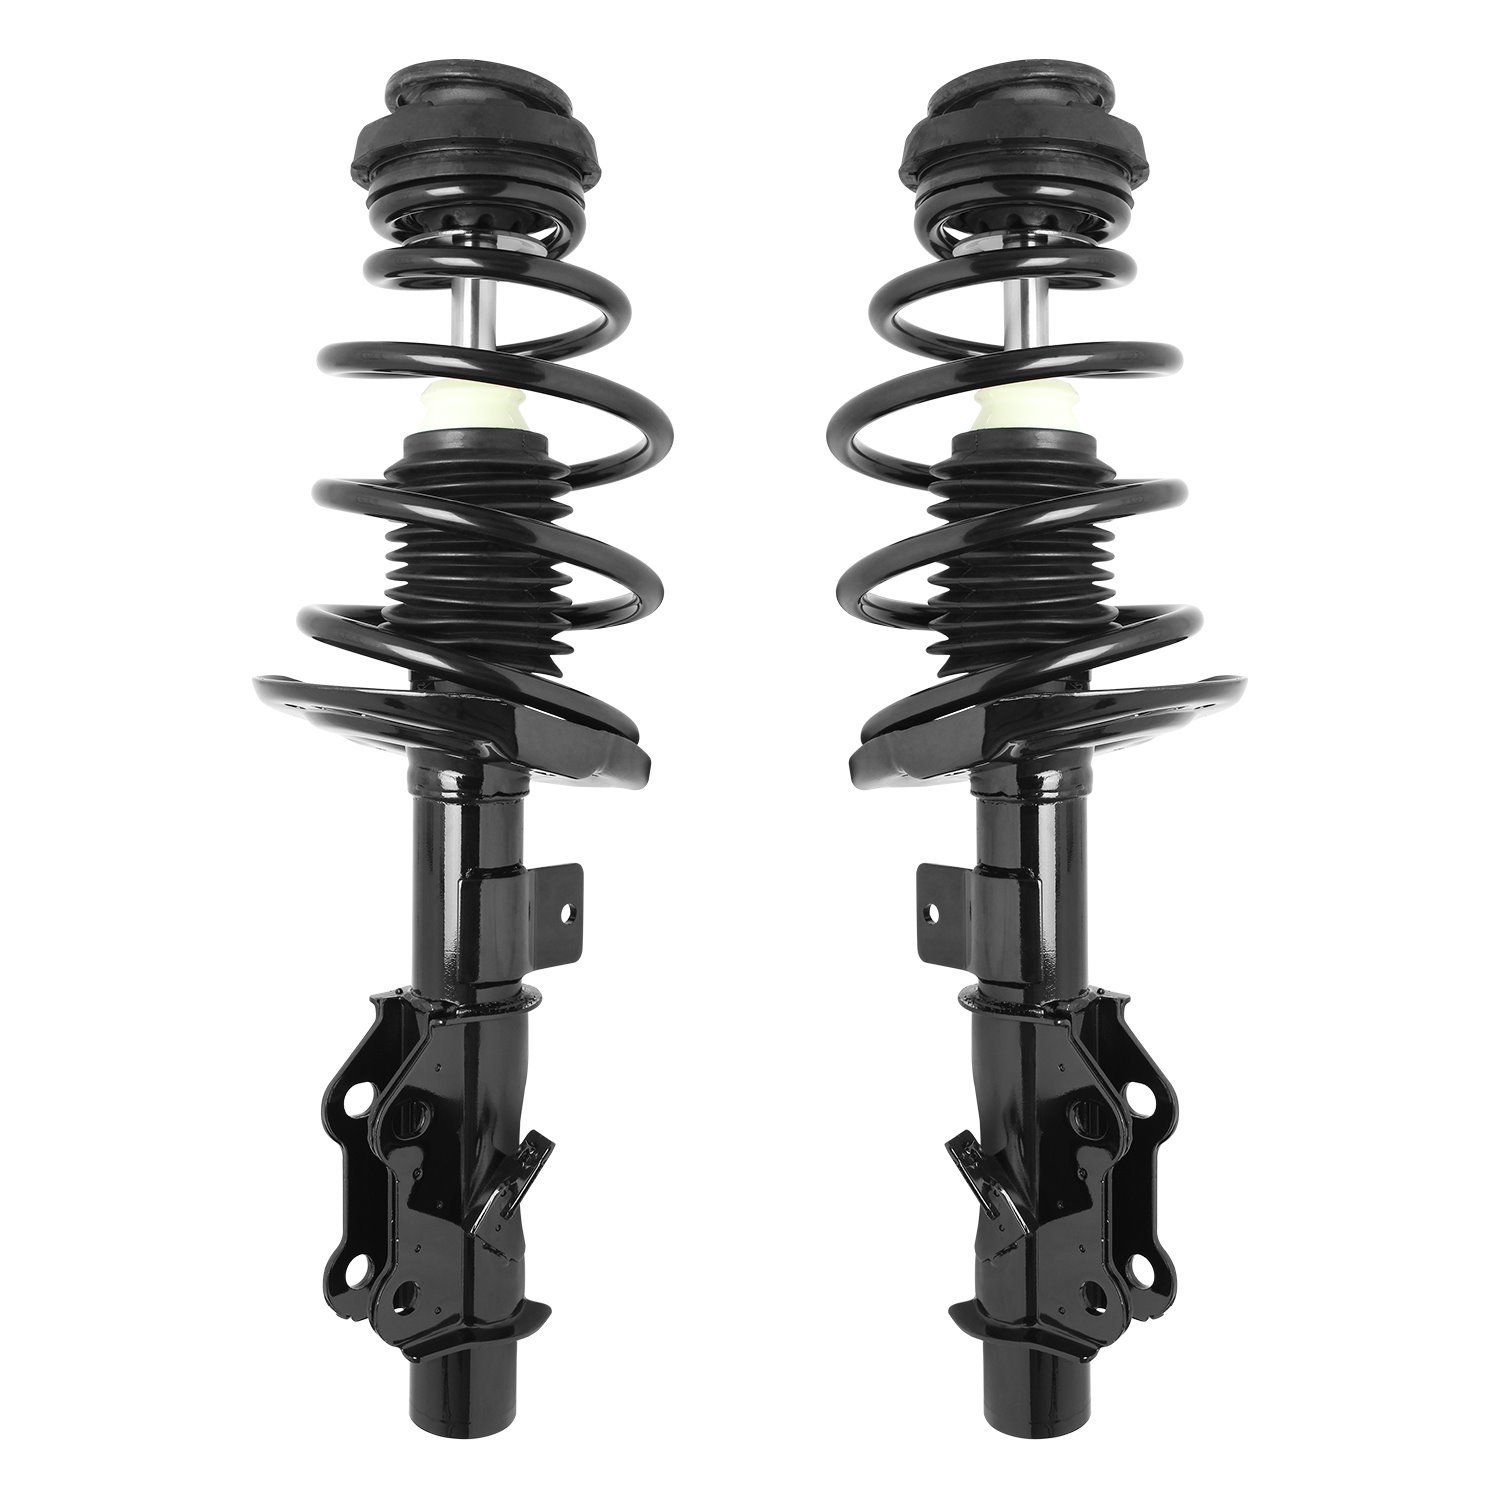 2-11623-11624-001 Suspension Strut & Coil Spring Assembly Set Fits Select Chevy Camaro